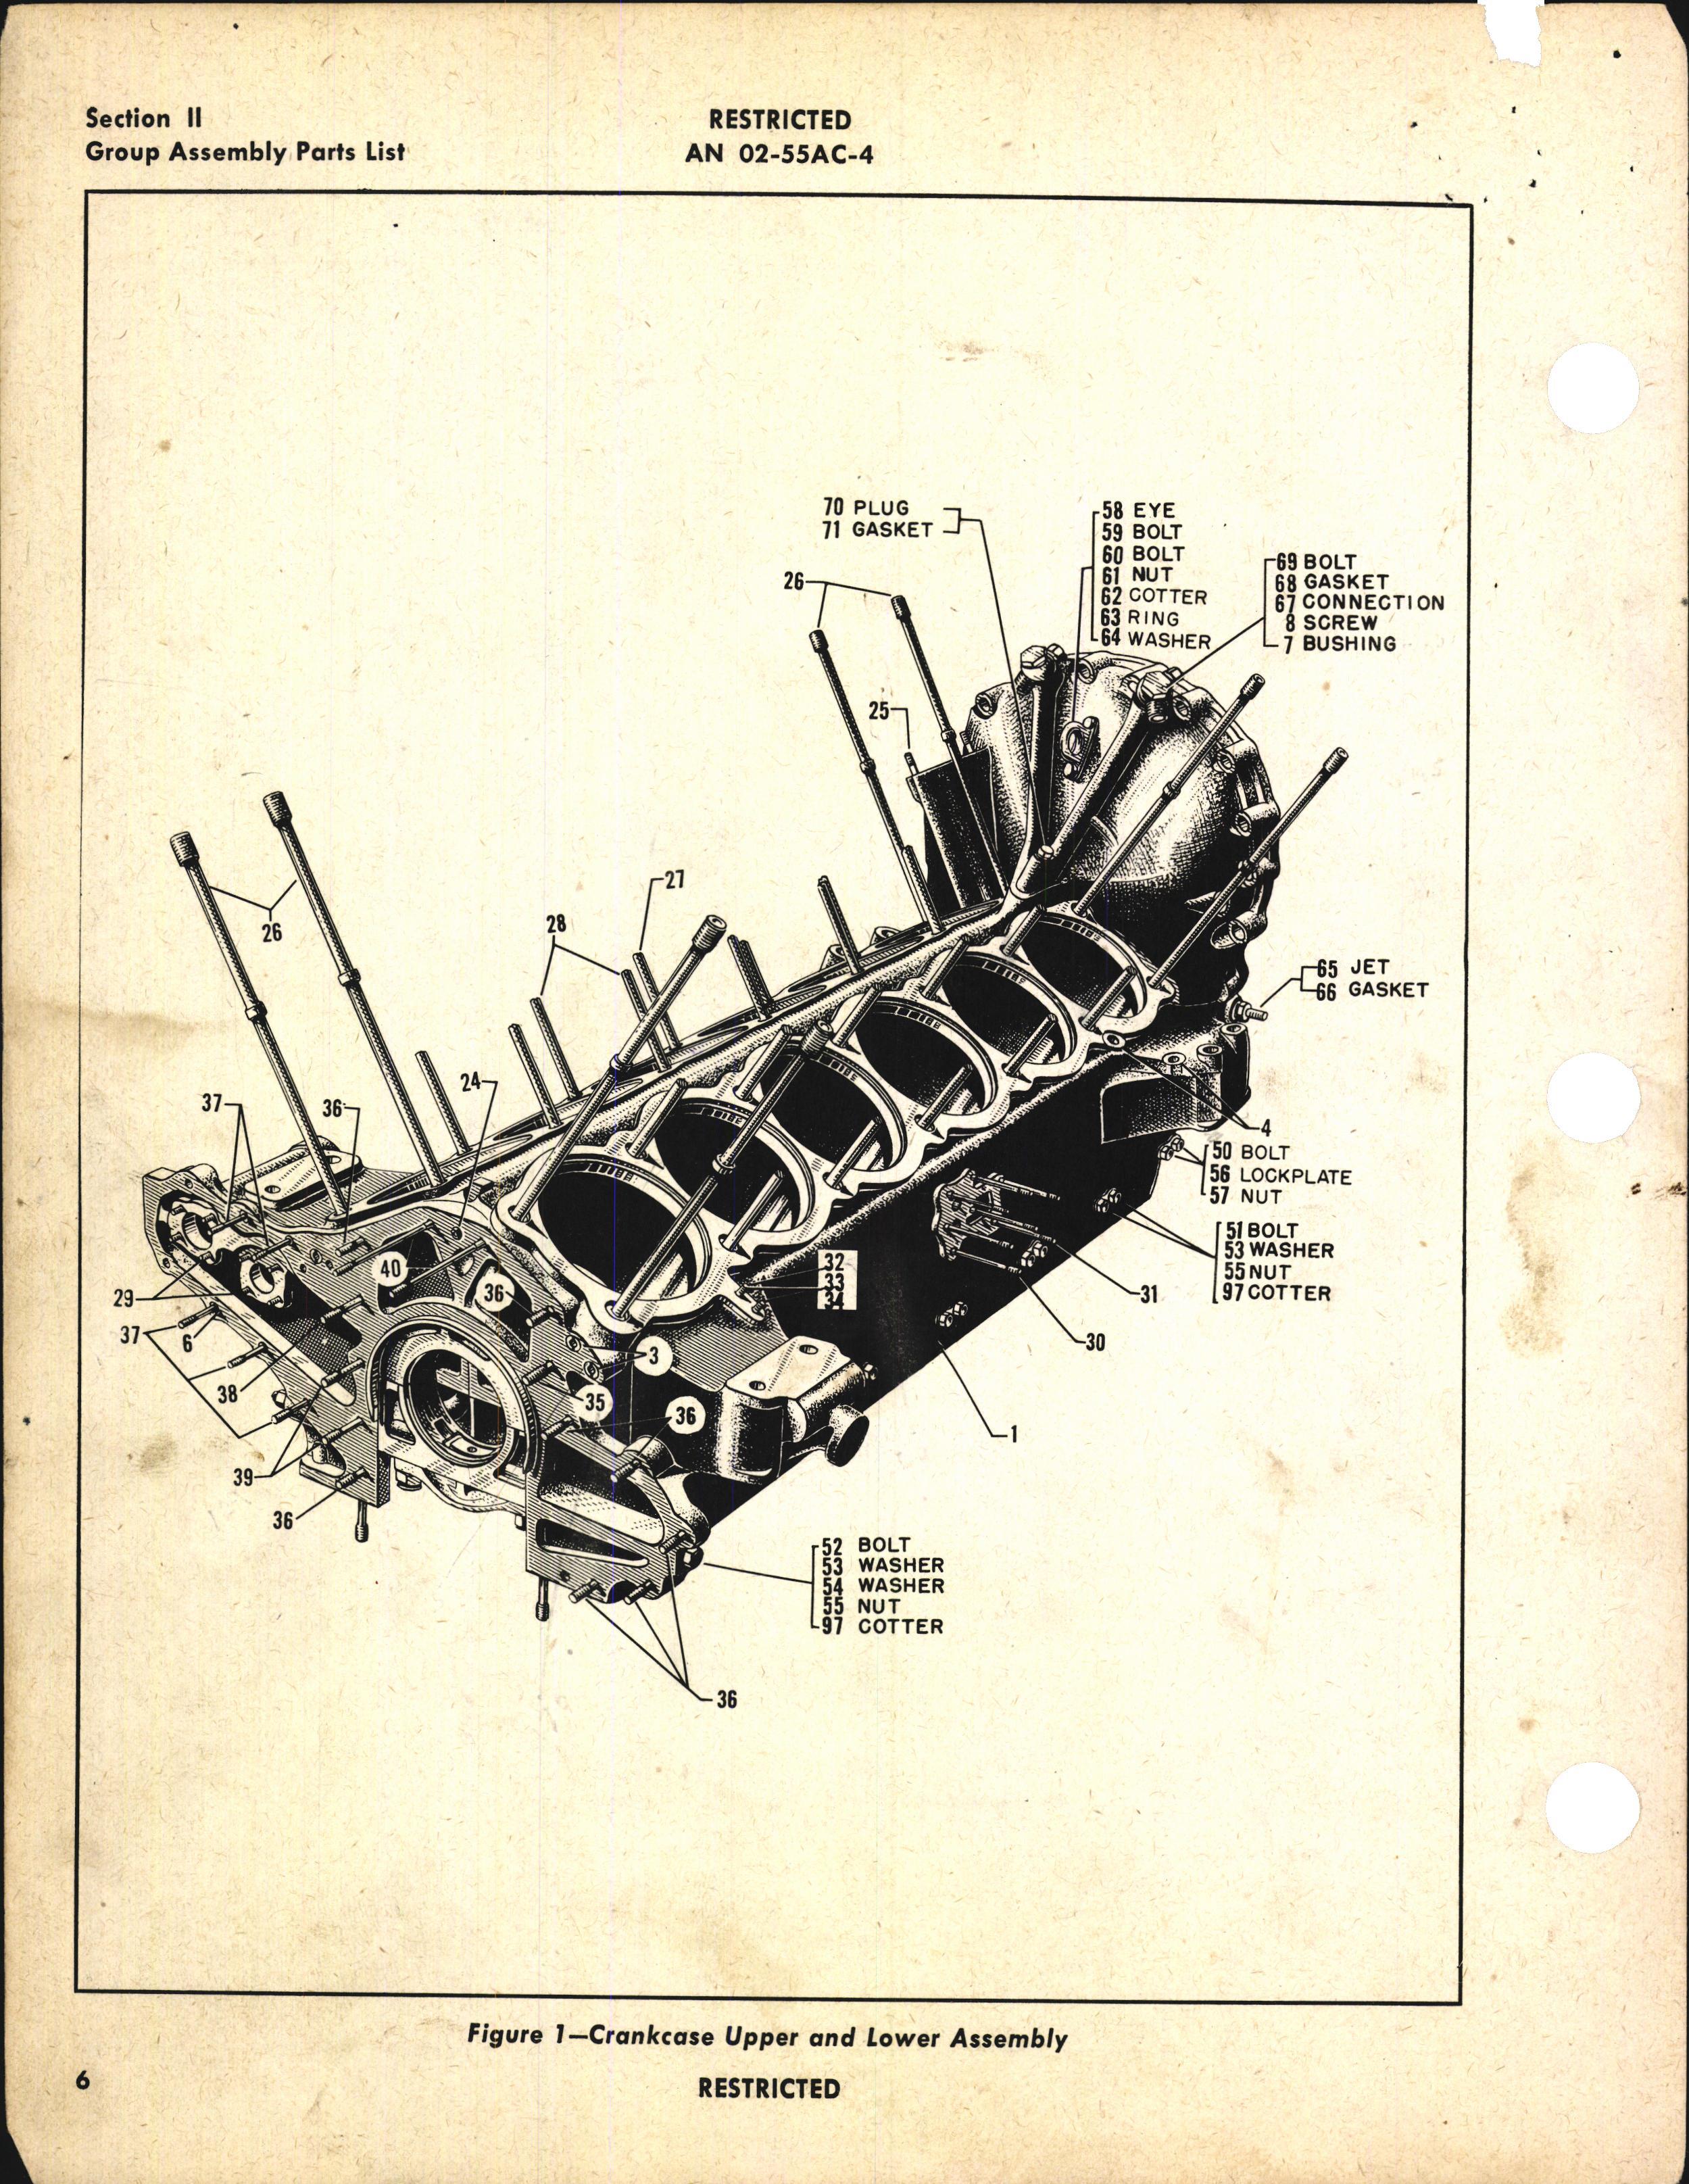 Sample page 6 from AirCorps Library document: Parts Catalog for V-1650-3, -7, -13, -17, and Merlin 68 and 69